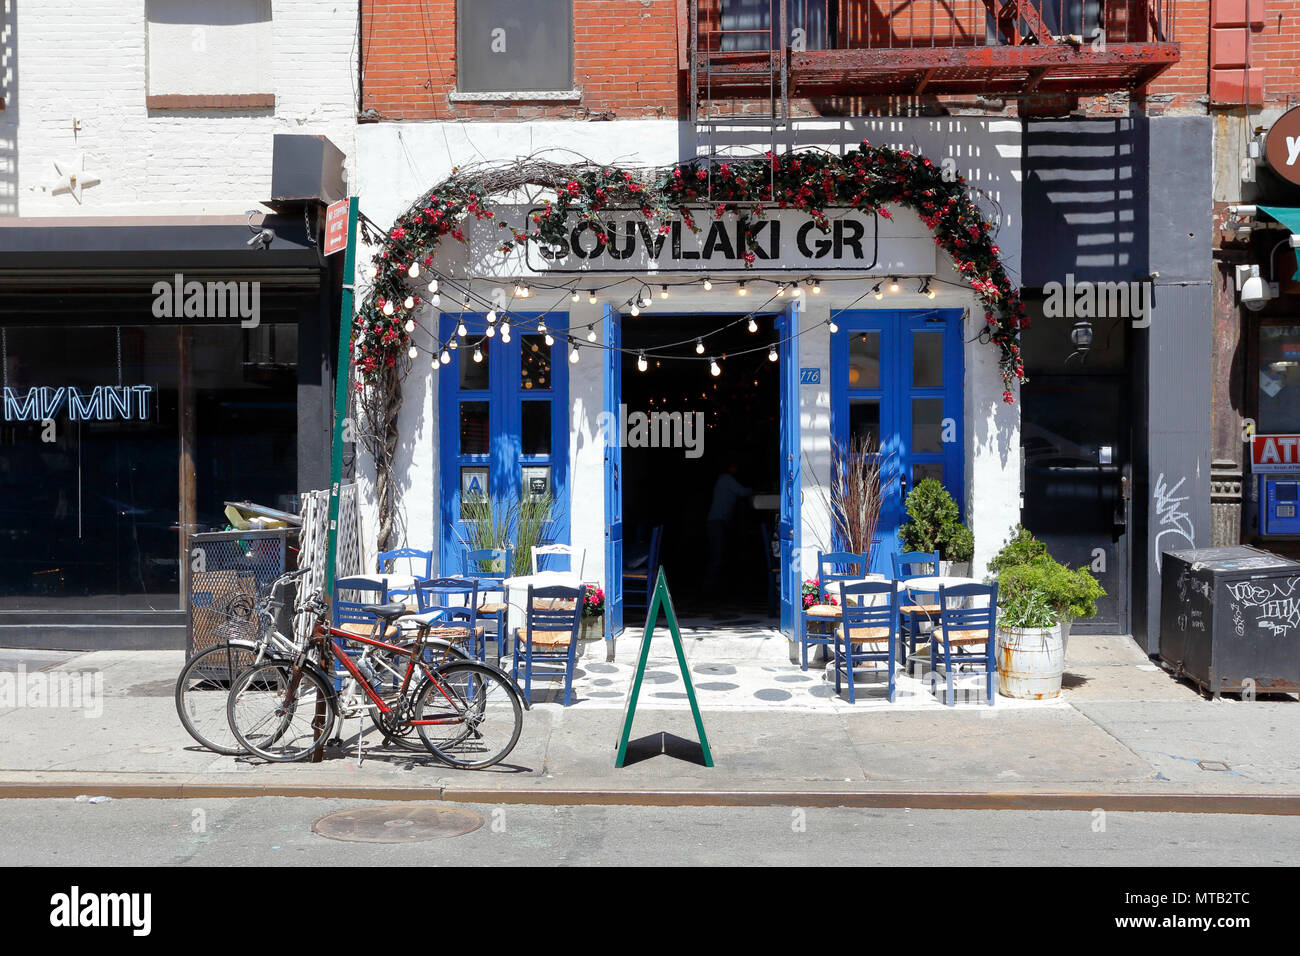 Souvlaki GR, 116 Stanton St, New York, NY. exterior storefront of a greek restaurant, and sidewalk cafe in Manhattan's Lower East Side. Stock Photo